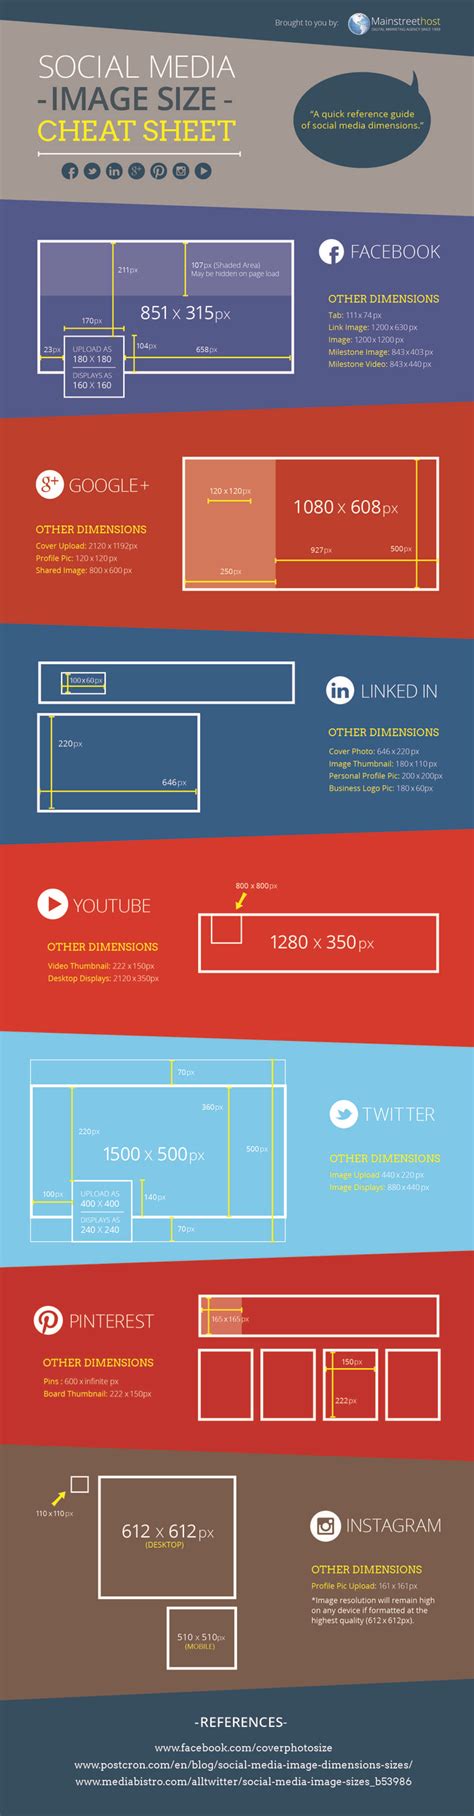 Social Media Image Size Cheat Sheet Infographic Visualistan